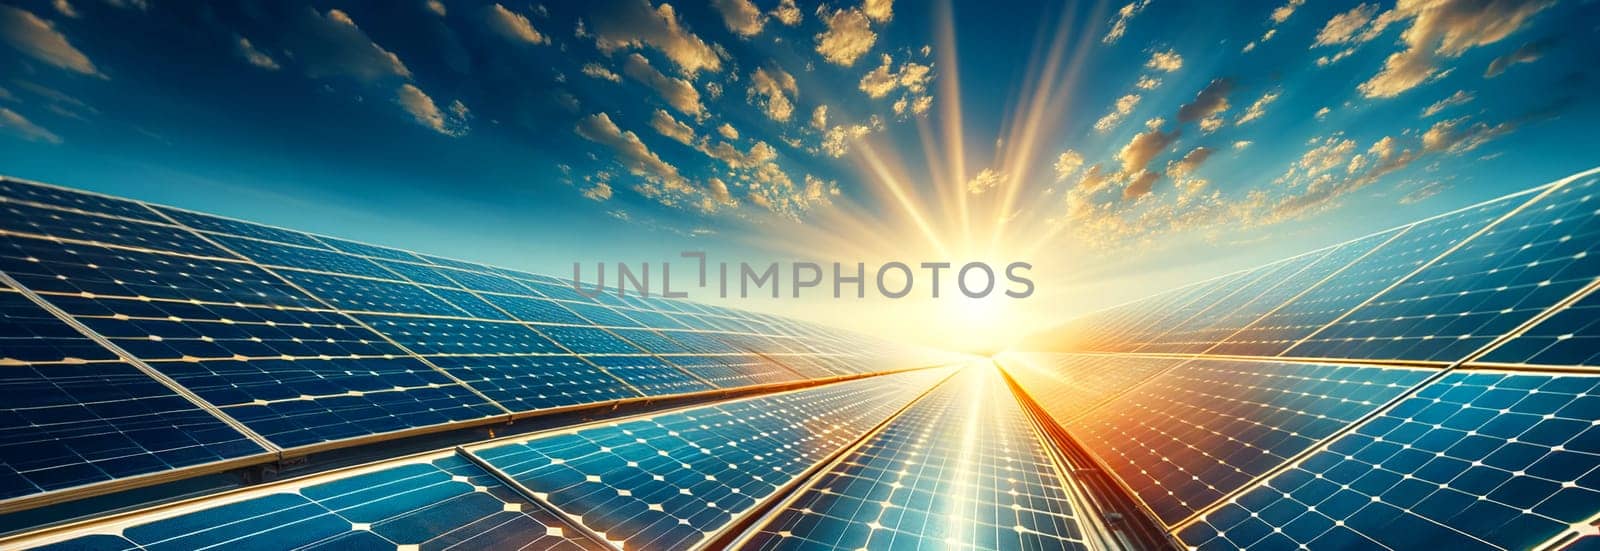 horizontal panorama of solar in sunlight, green energy concept by Annado